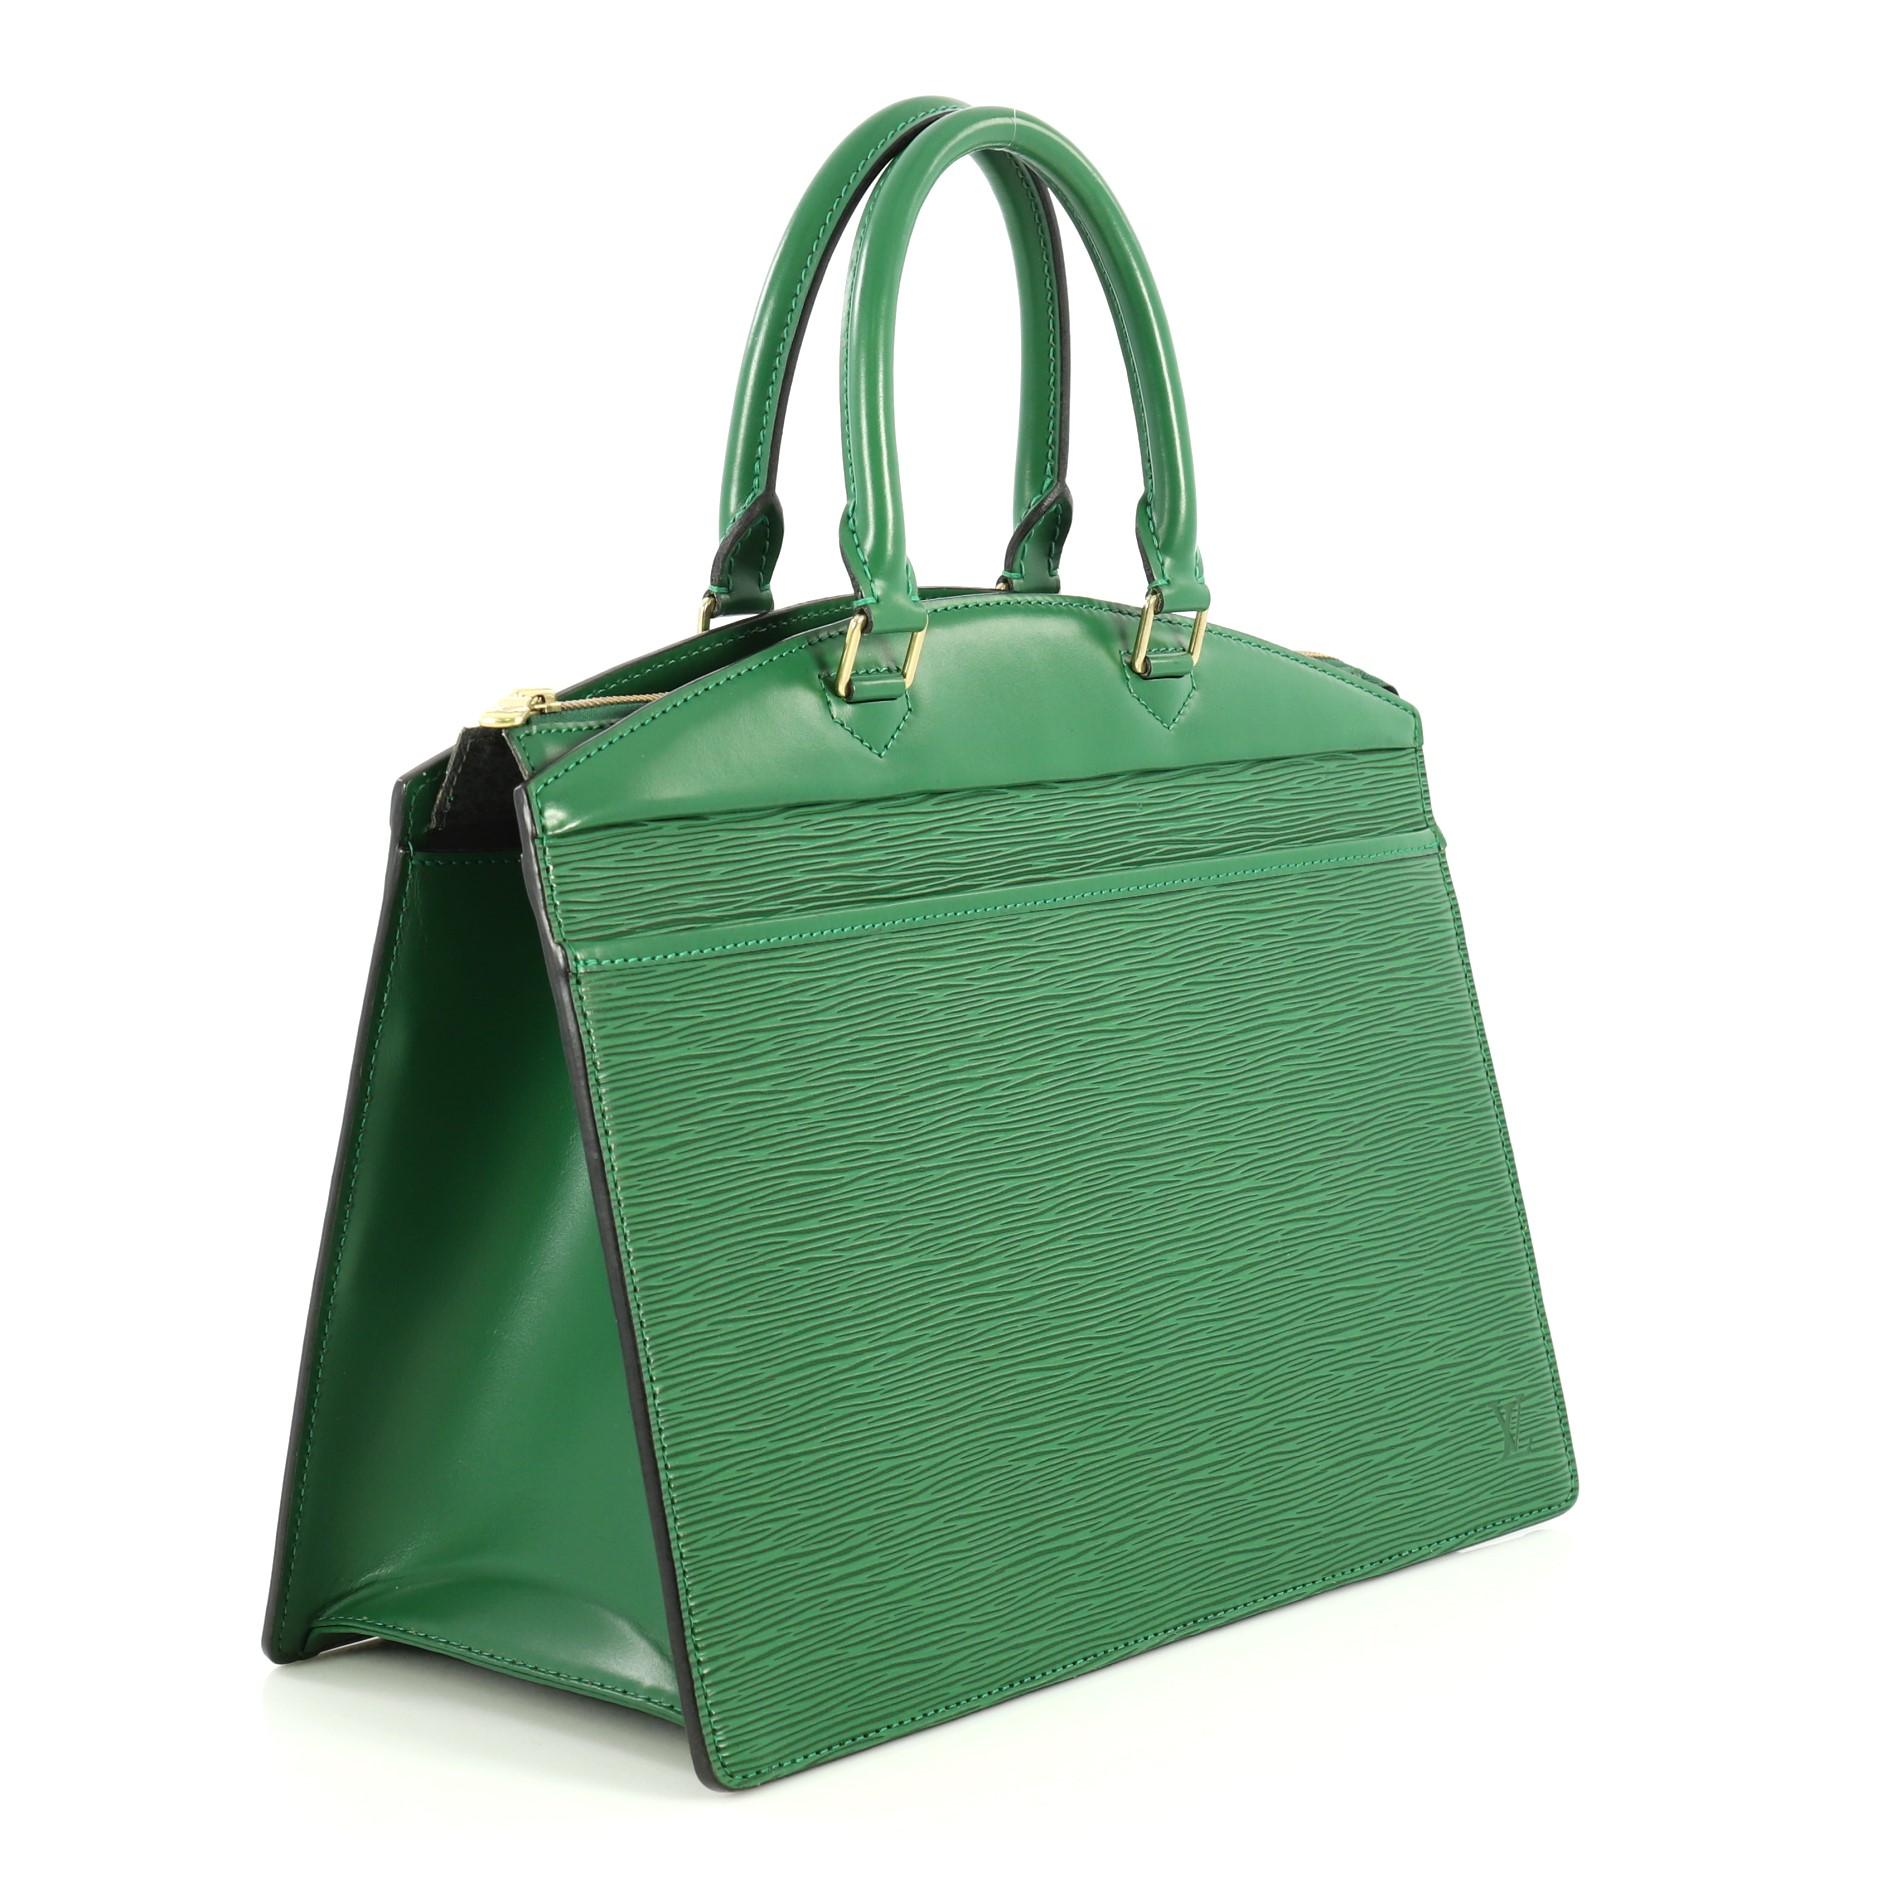 This Louis Vuitton Riviera Handbag Epi Leather, crafted from green epi leather, features dual rolled leather handles, full-length exterior front pocket, subtle LV monogram side logo, and gold-tone hardware. Its top zip closure opens to a gray